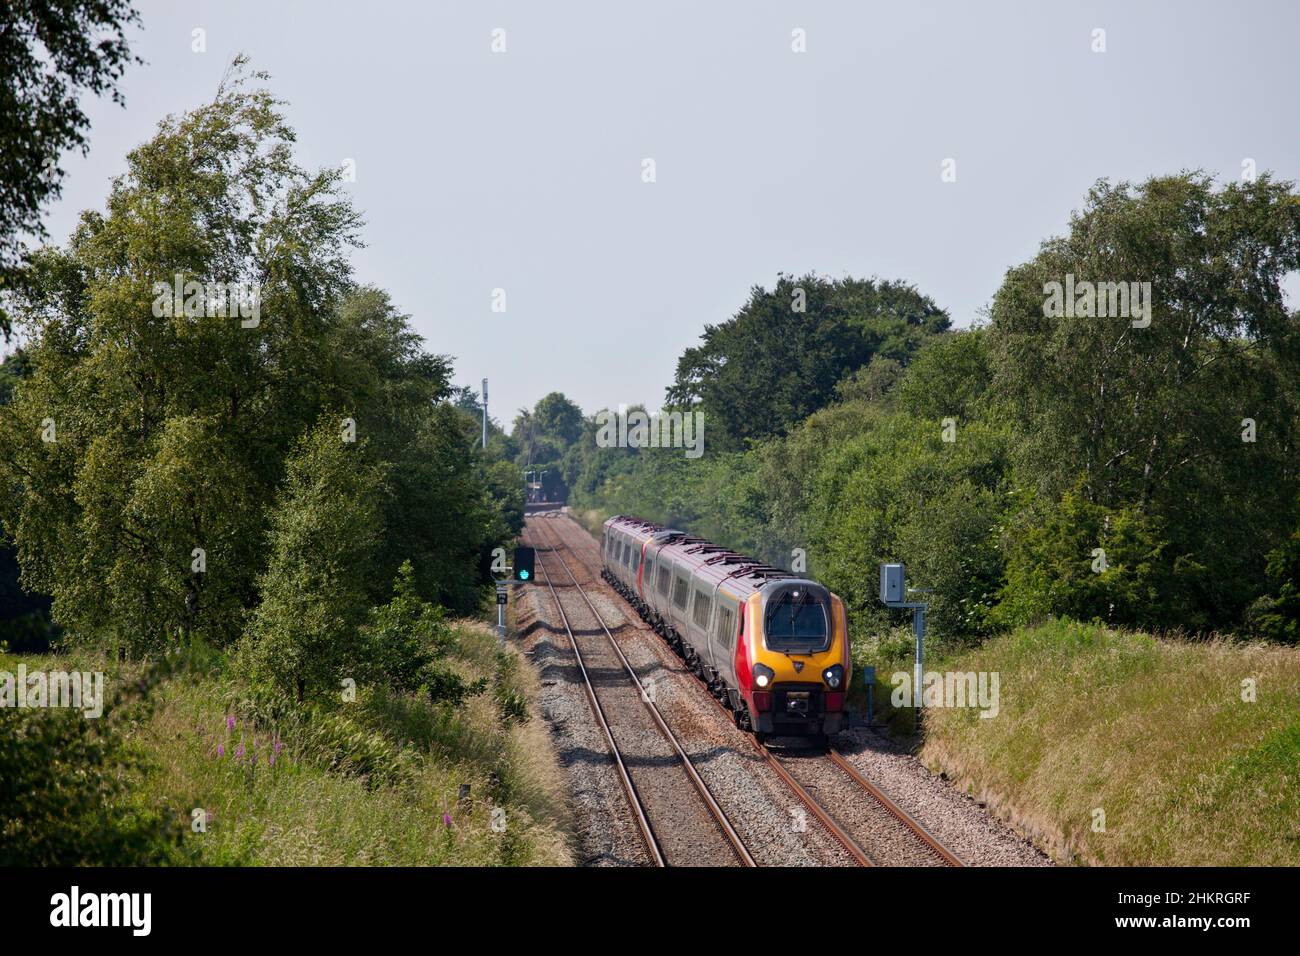 2 Virgin Trains Bombardier class 221 voyager trains passing Adlington, Lancashire with a diverted express train. Stock Photo